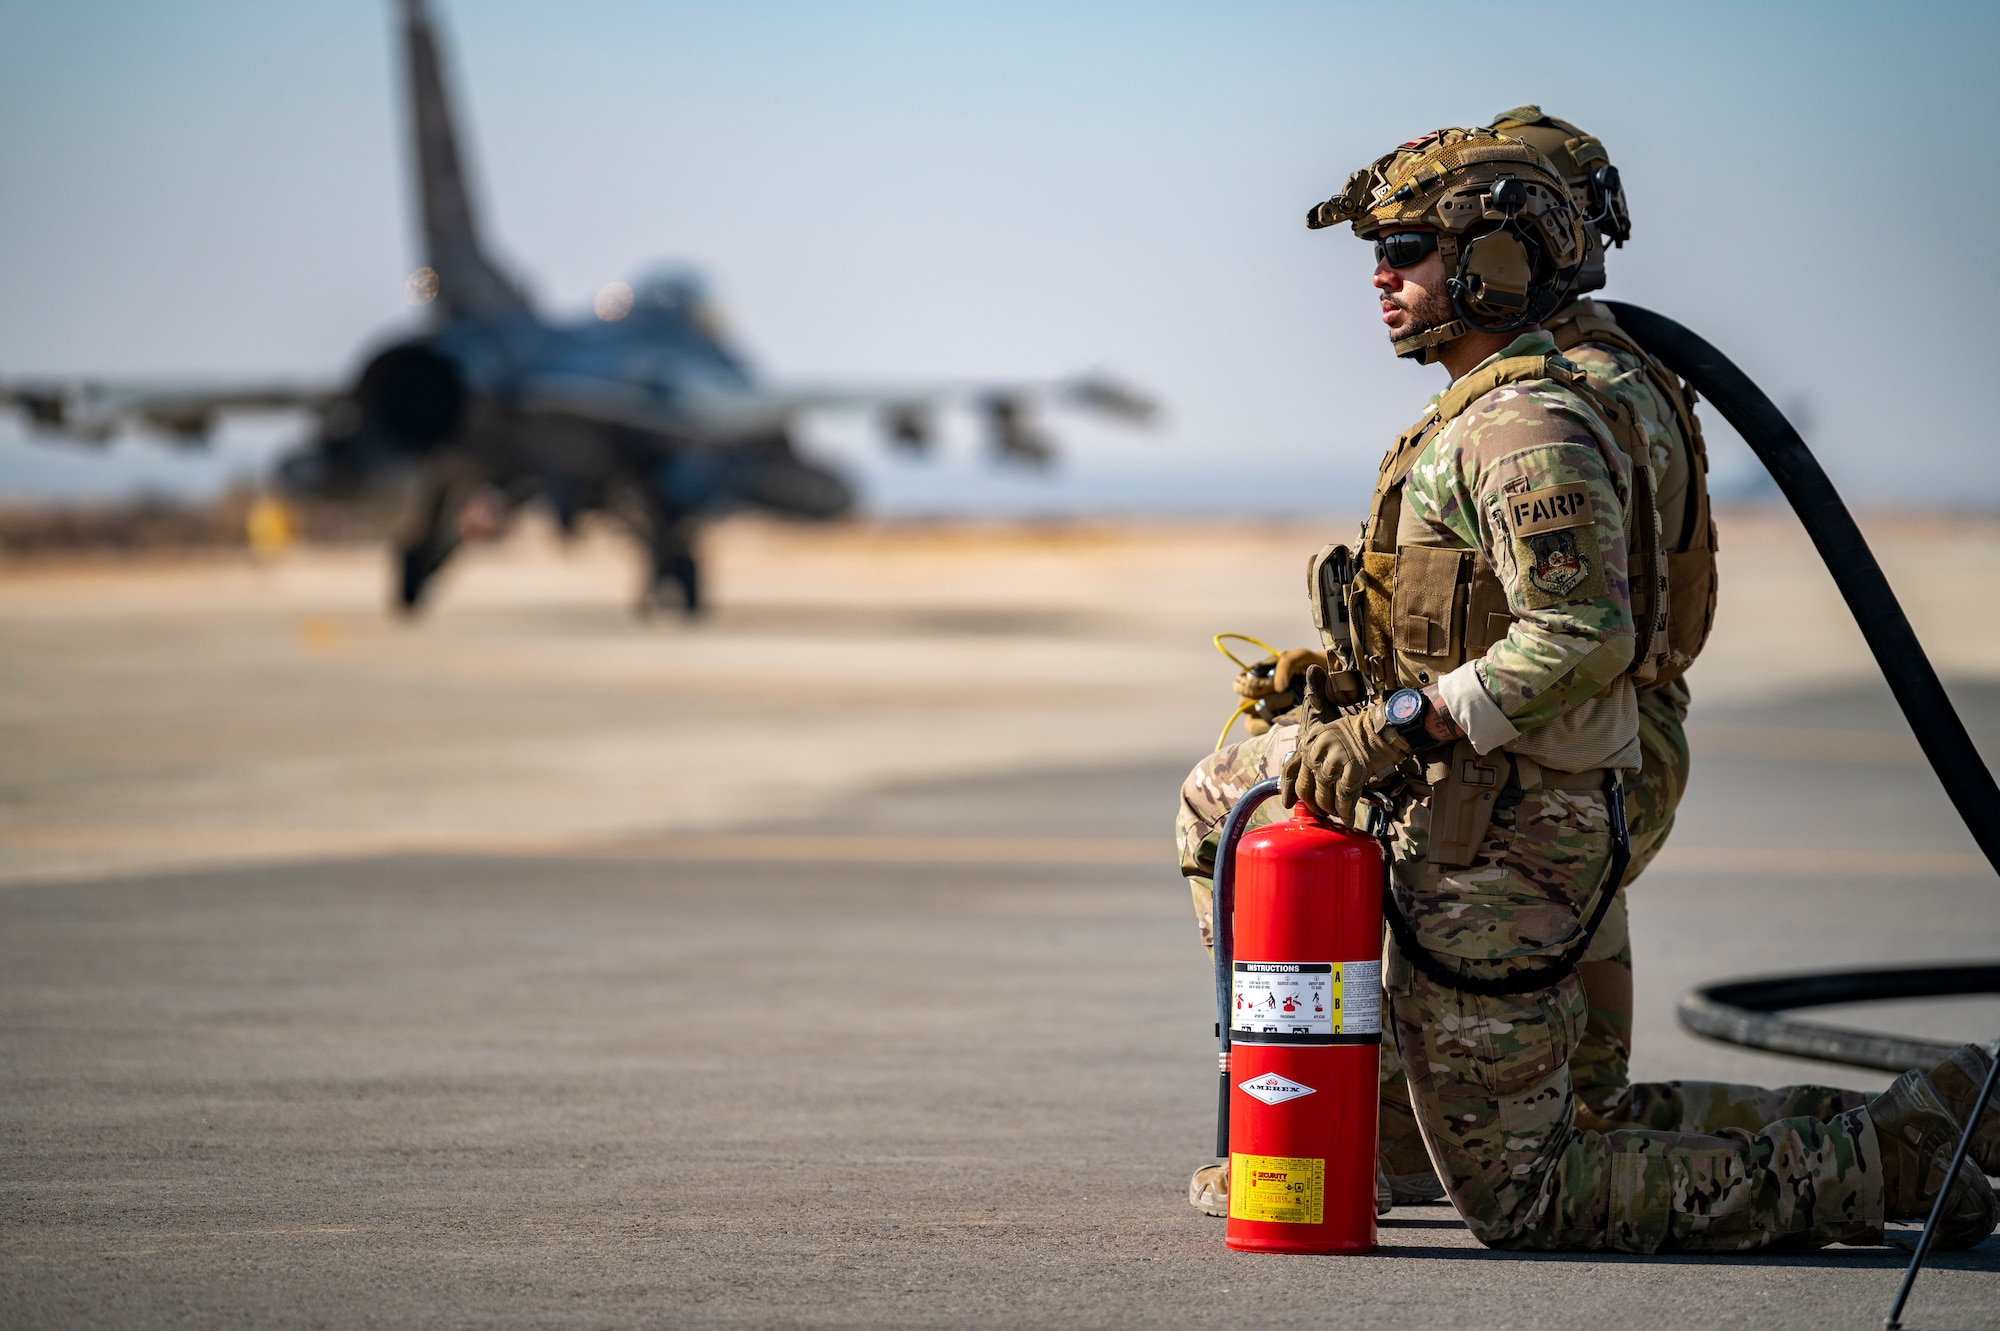 U.S. Airmen from the 26th Expeditionary Rescue Squadron wait to set up a Forward Area Refueling Point (FARP) for two F-16C Fighting Falcons Nov. 26, 2021, at an undisclosed location somewhere in Southwest Asia.